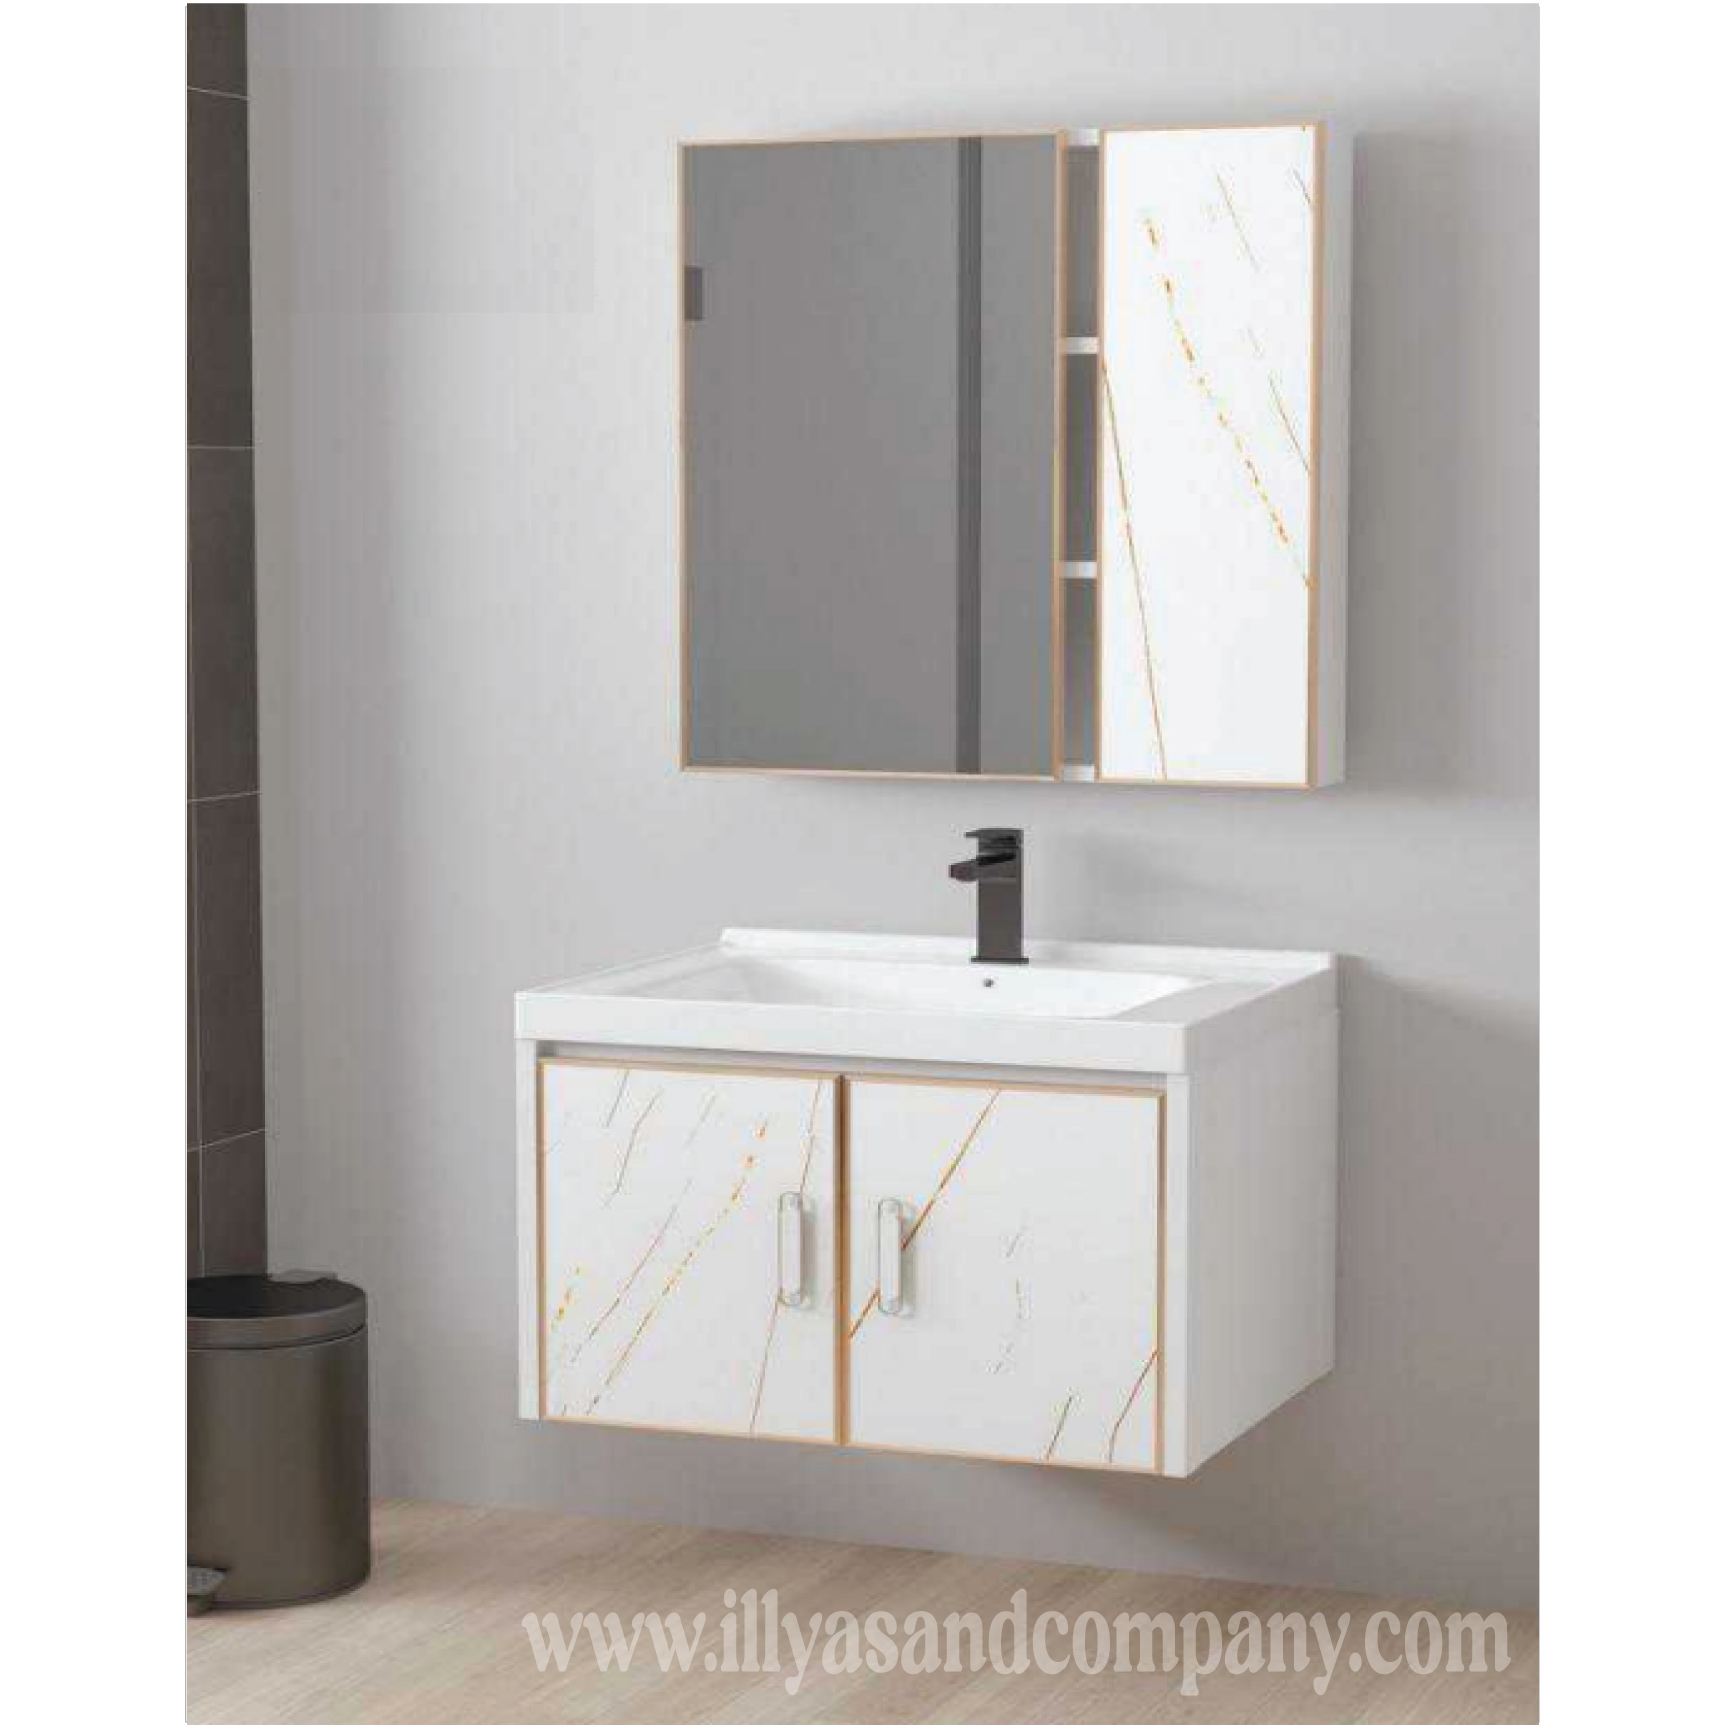 Shanks Mirrors and Cabinet